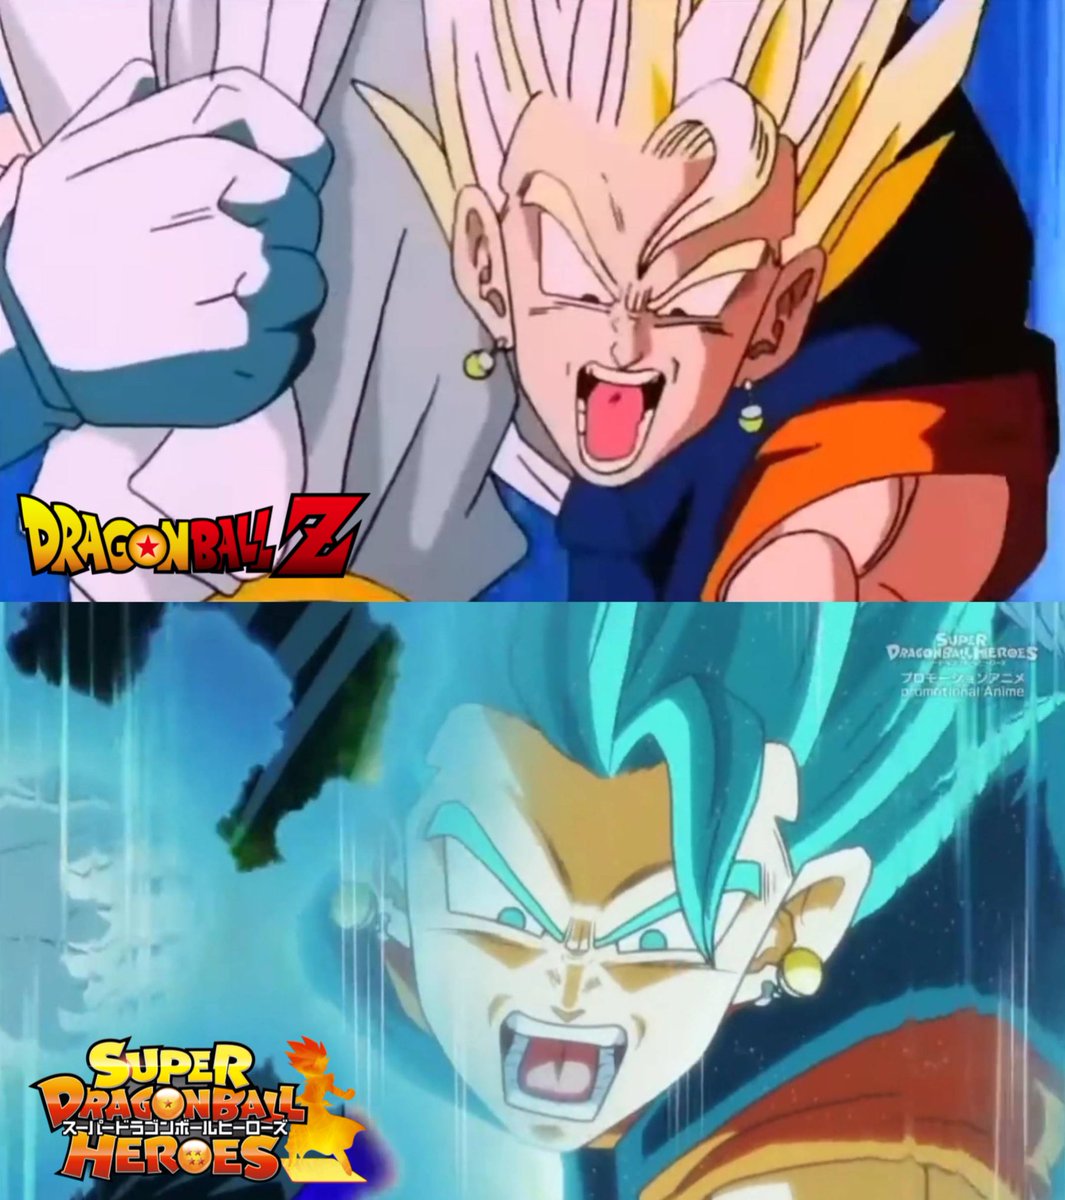 Nice reference👀

It sucks that they let Vegito defuse so quickly though.